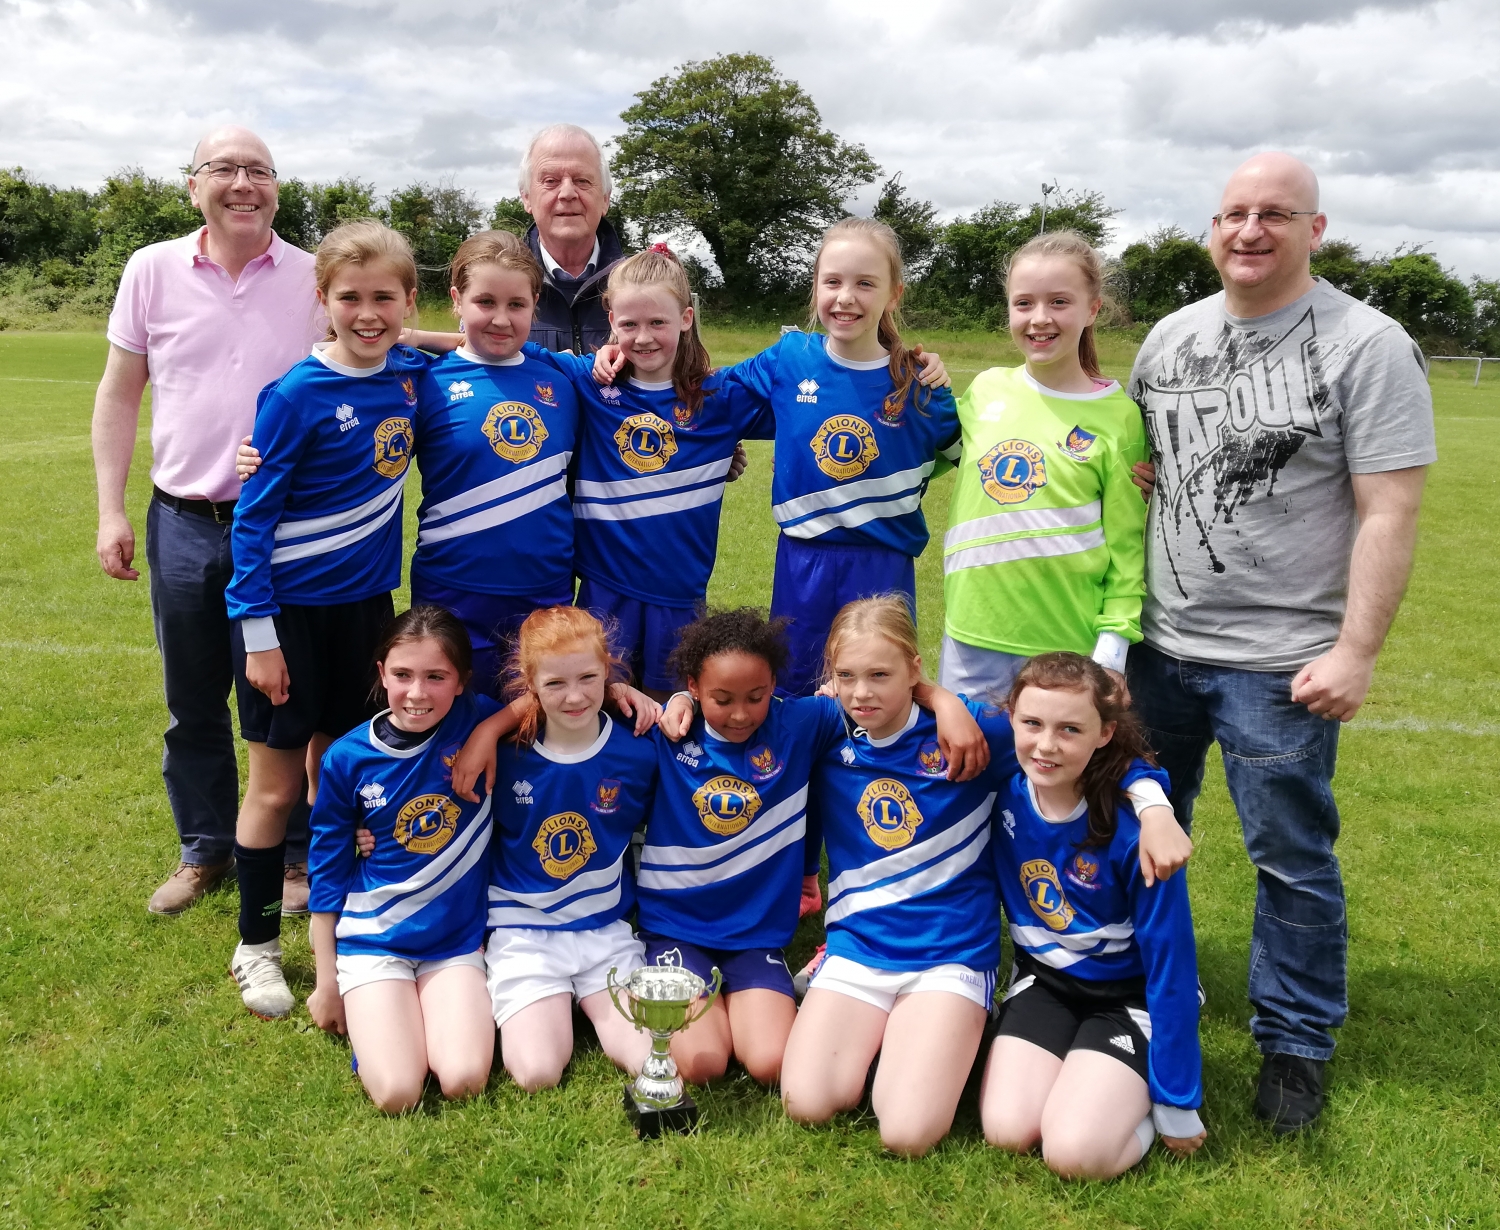 The victorious Tullamore Town U11 team and management